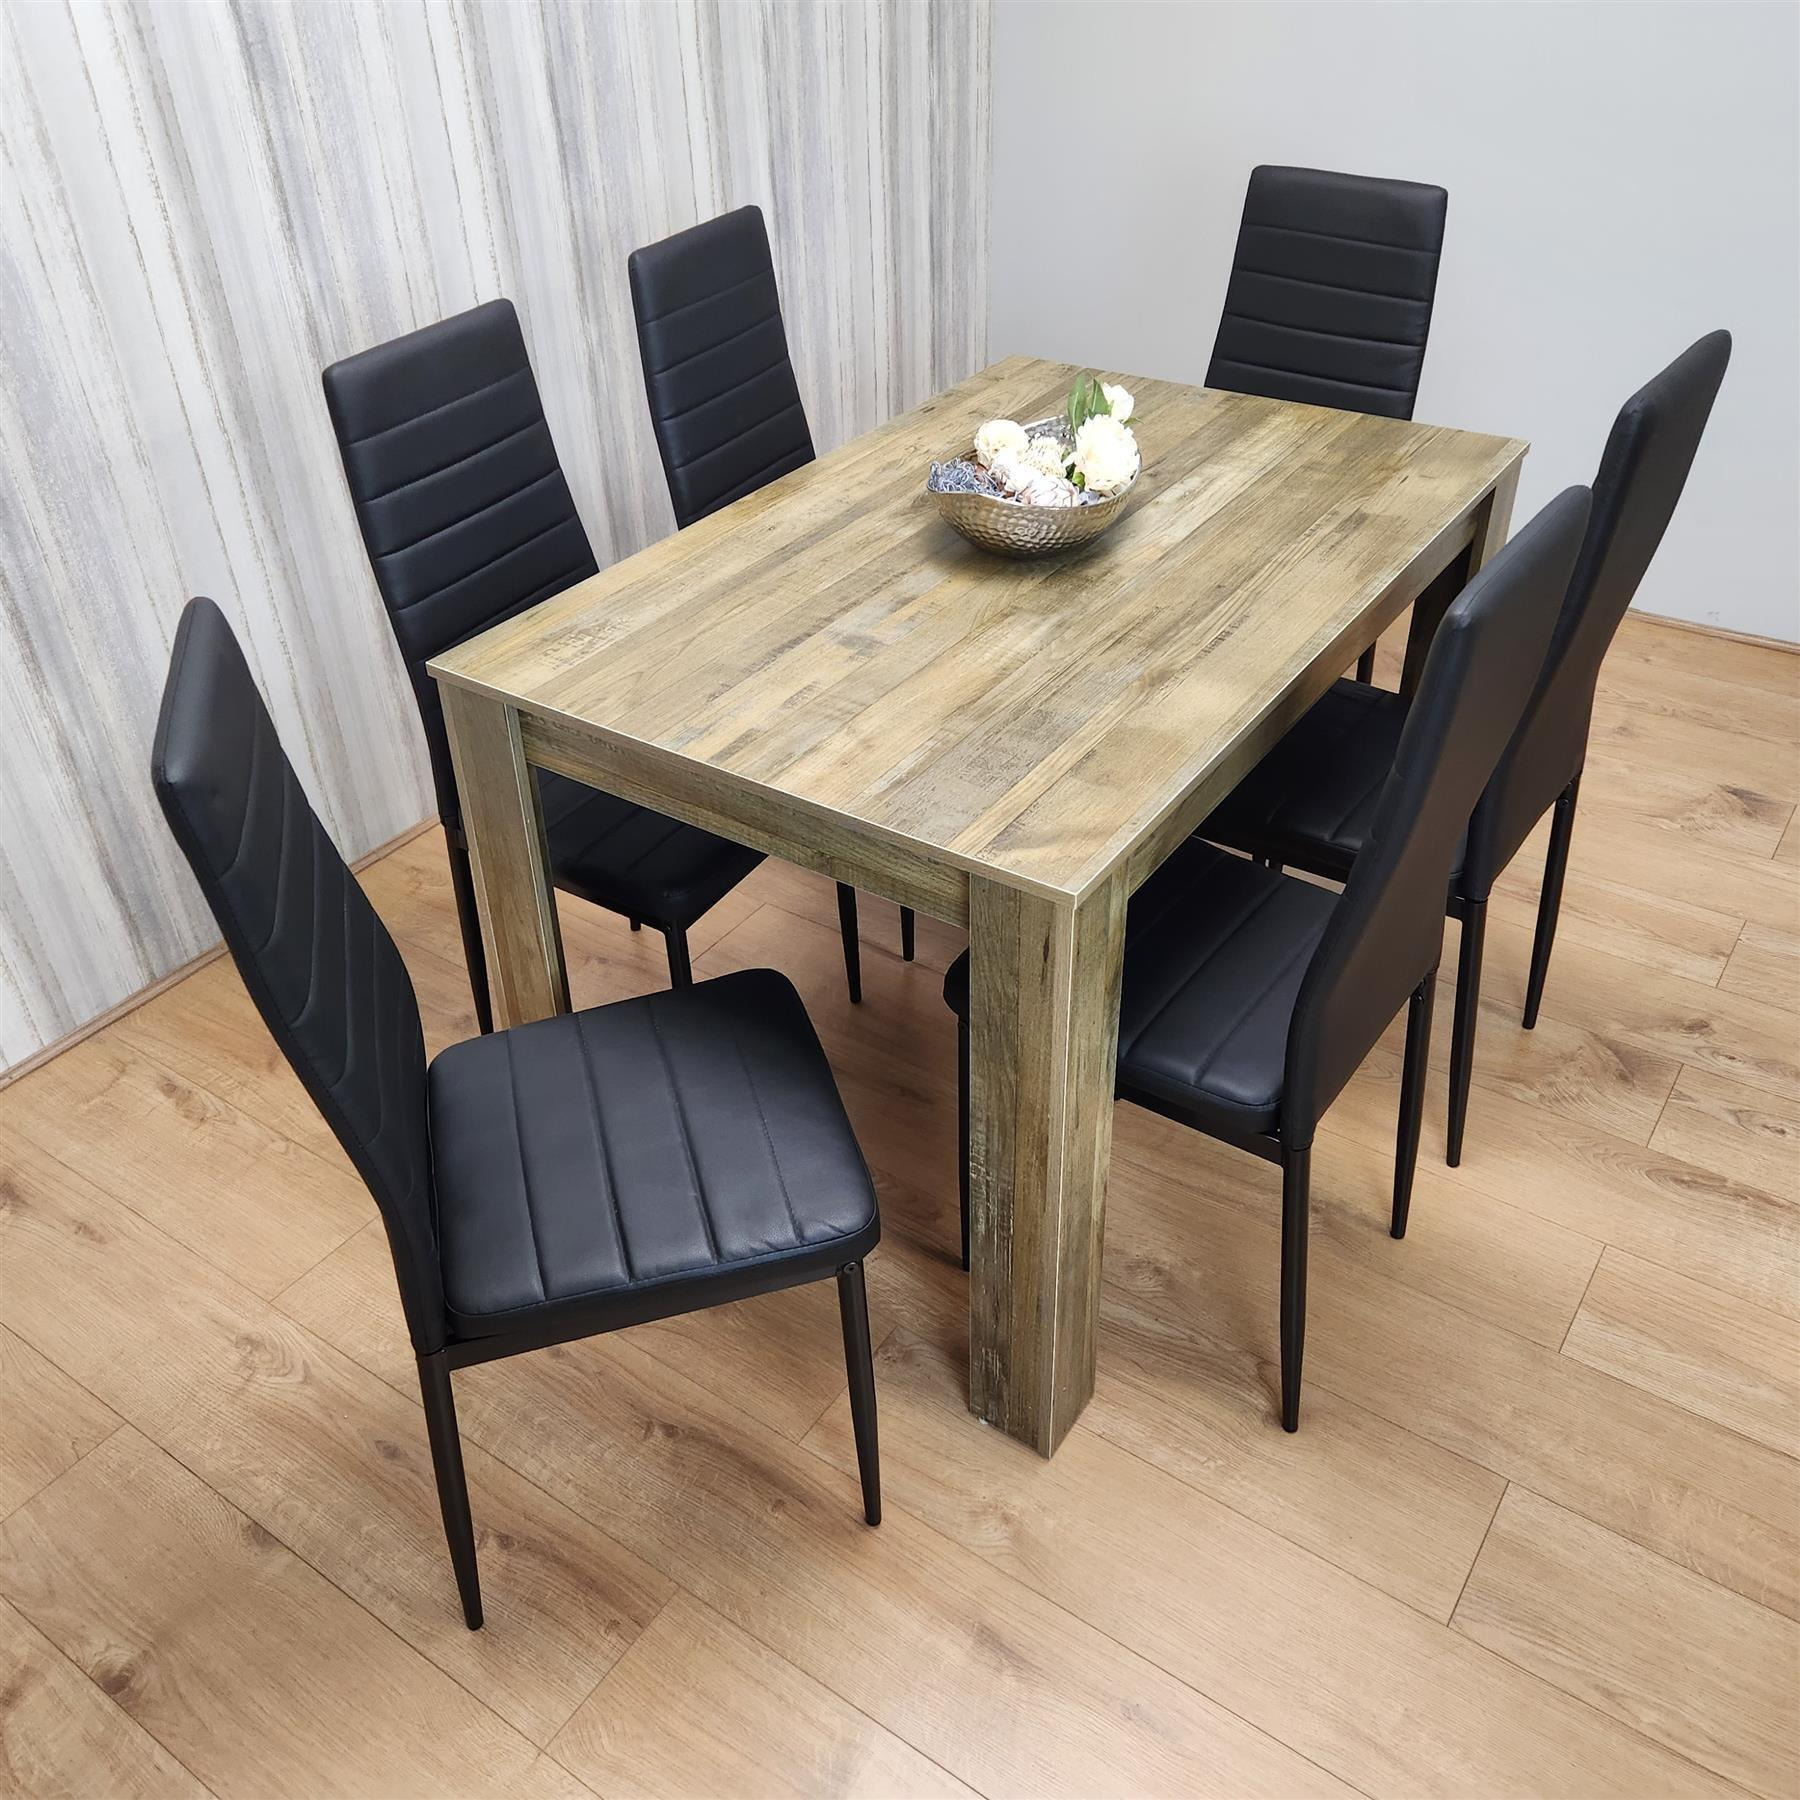 Dining Table Set with 6 Chairs Dining Room and Kitchen table set of 6 - image 1